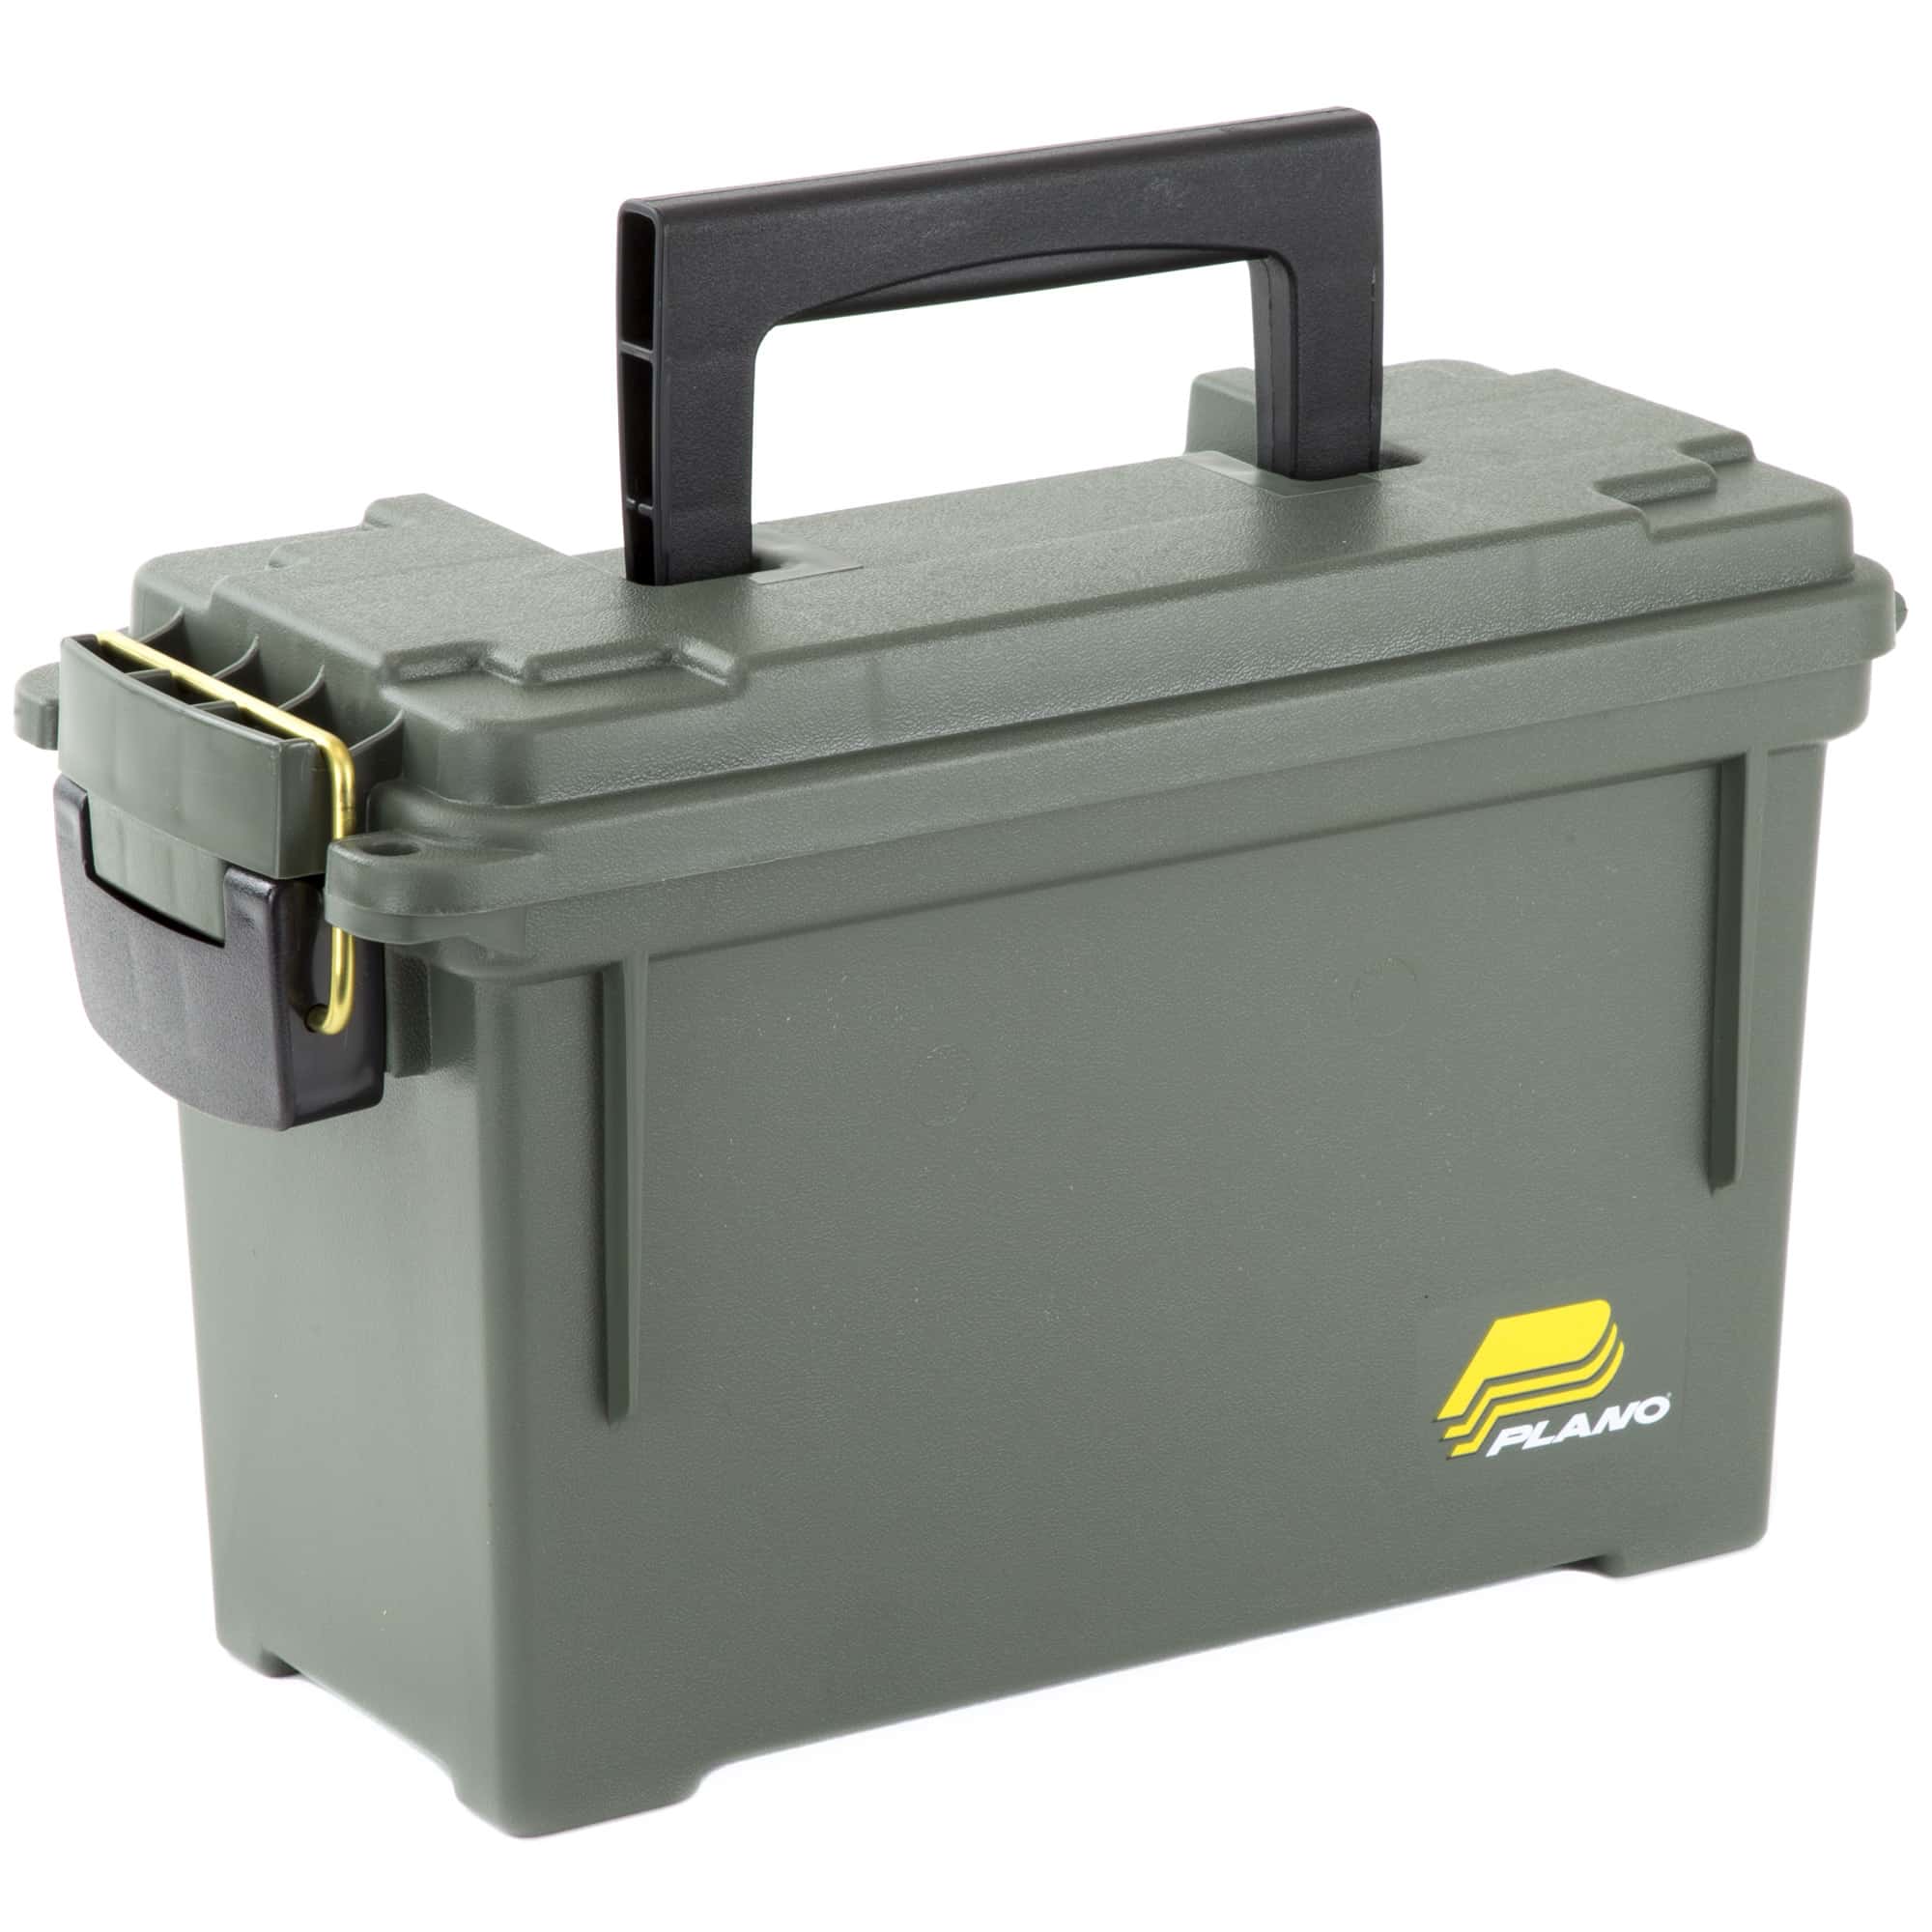  Plano Rustrictor Field Ammo Box .30 Caliber, Gray, All-Weather  & Anti-Rust Ammo Storage Box, Small Plastic Ammunition Box, Waterproof Ammo  Can, Holds 6-8 Boxes of Ammunition : Sports & Outdoors